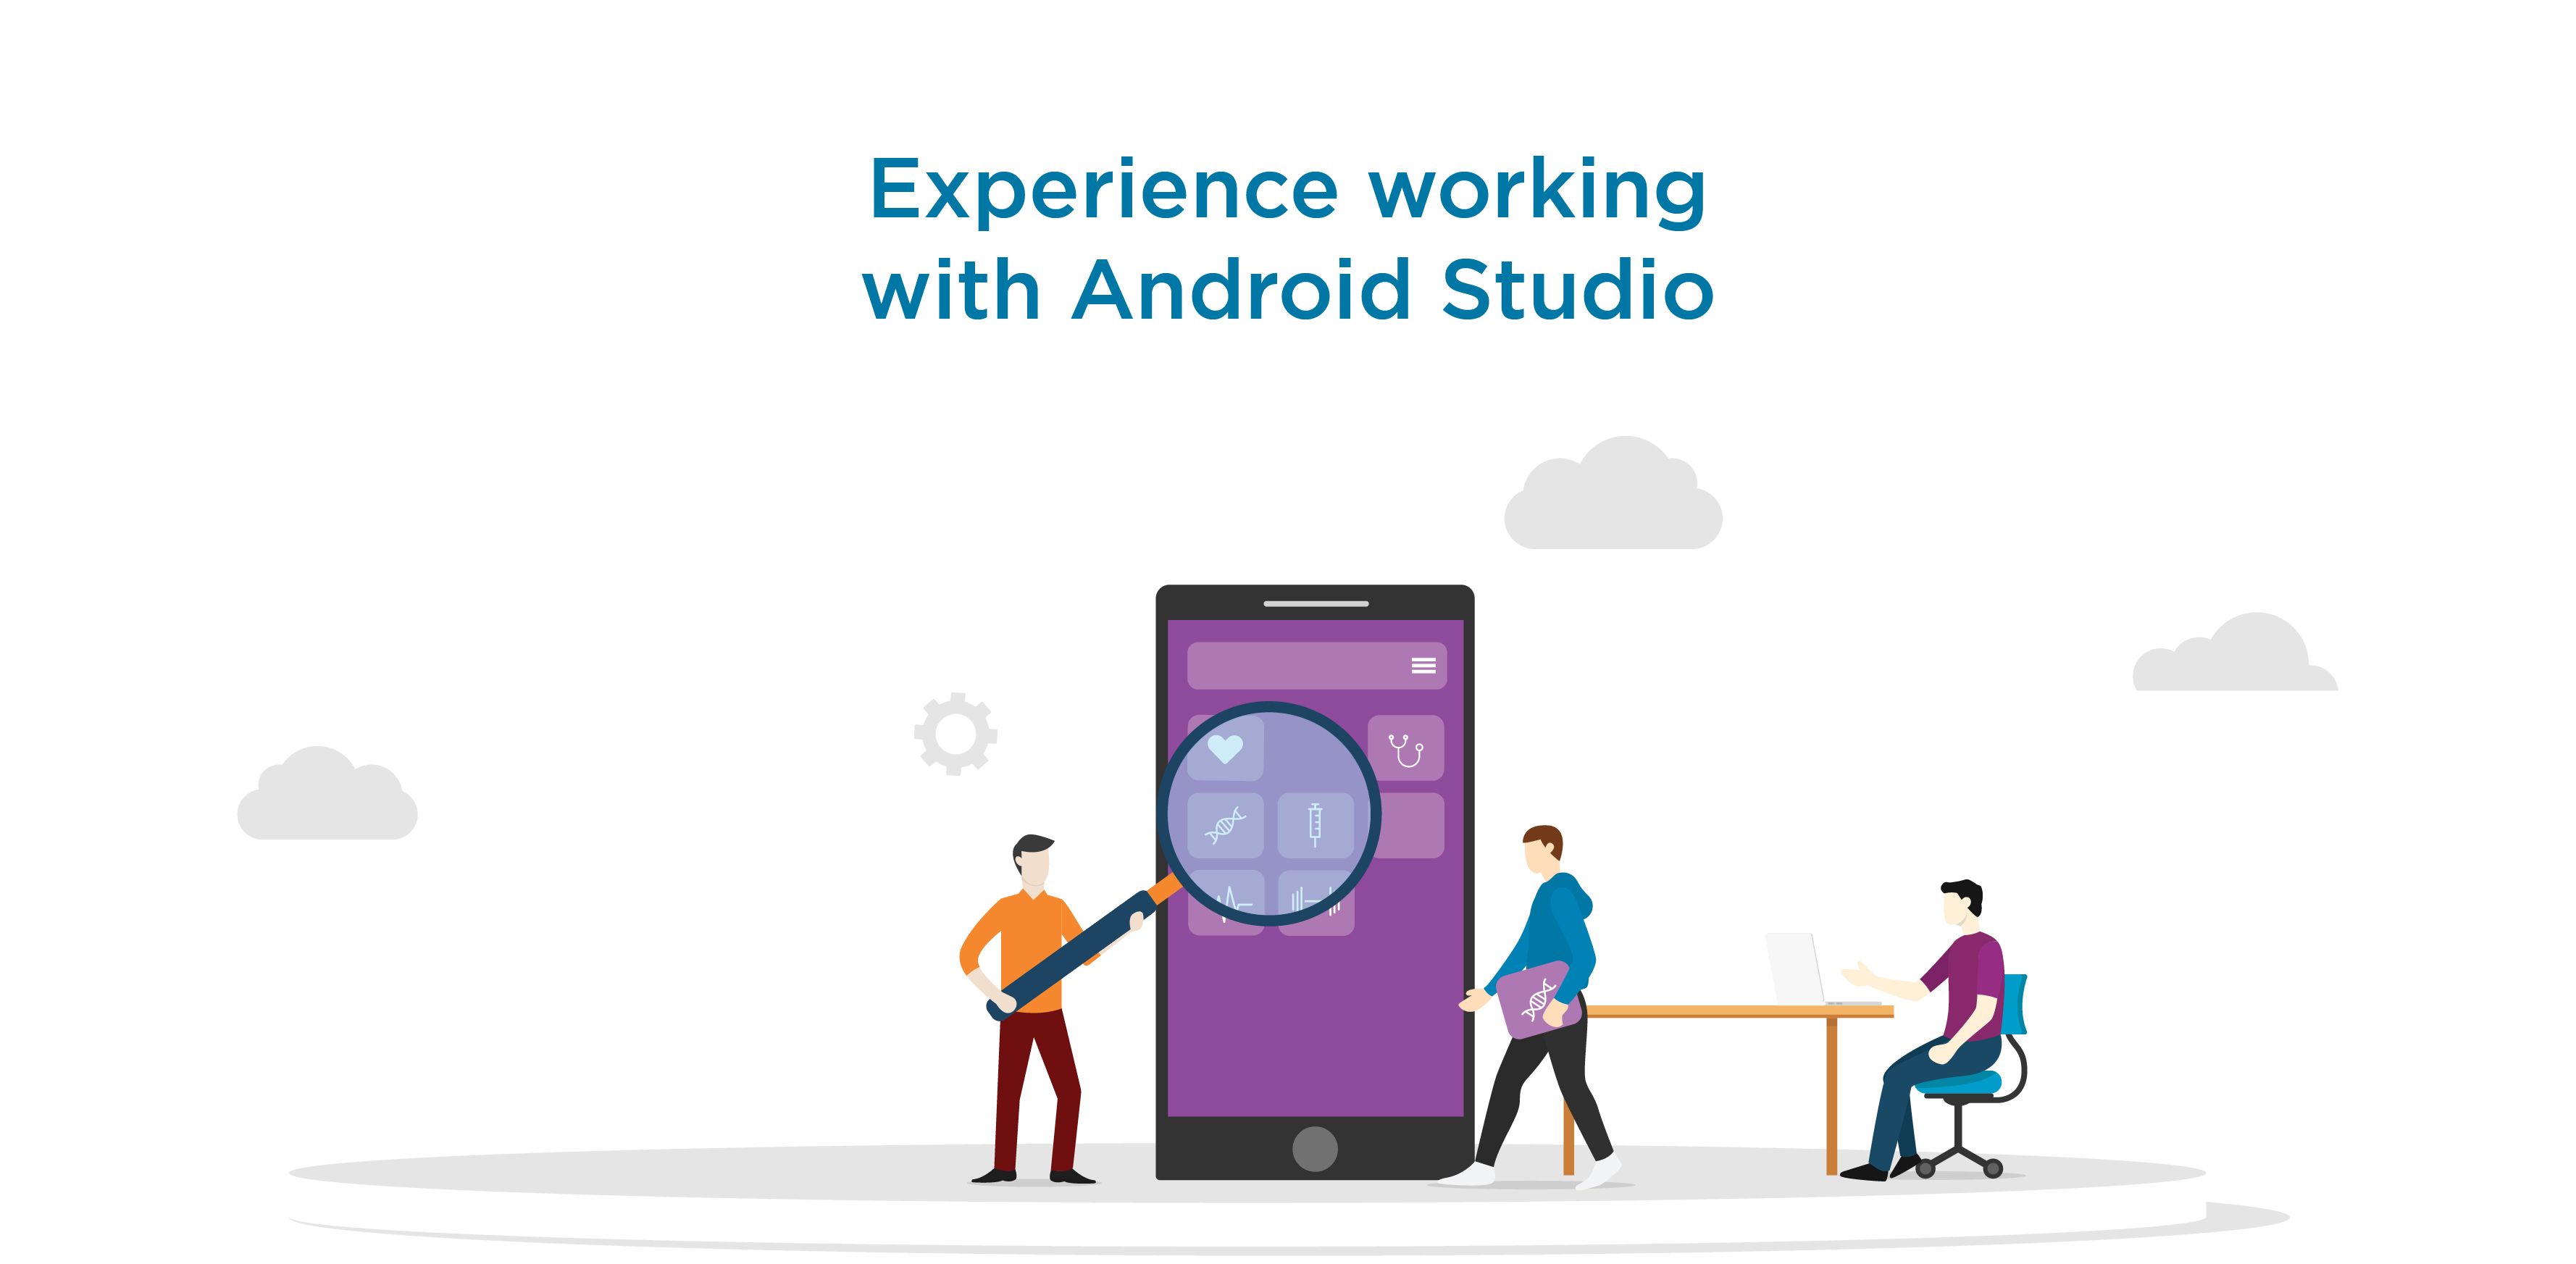 Experience working with Android Studio